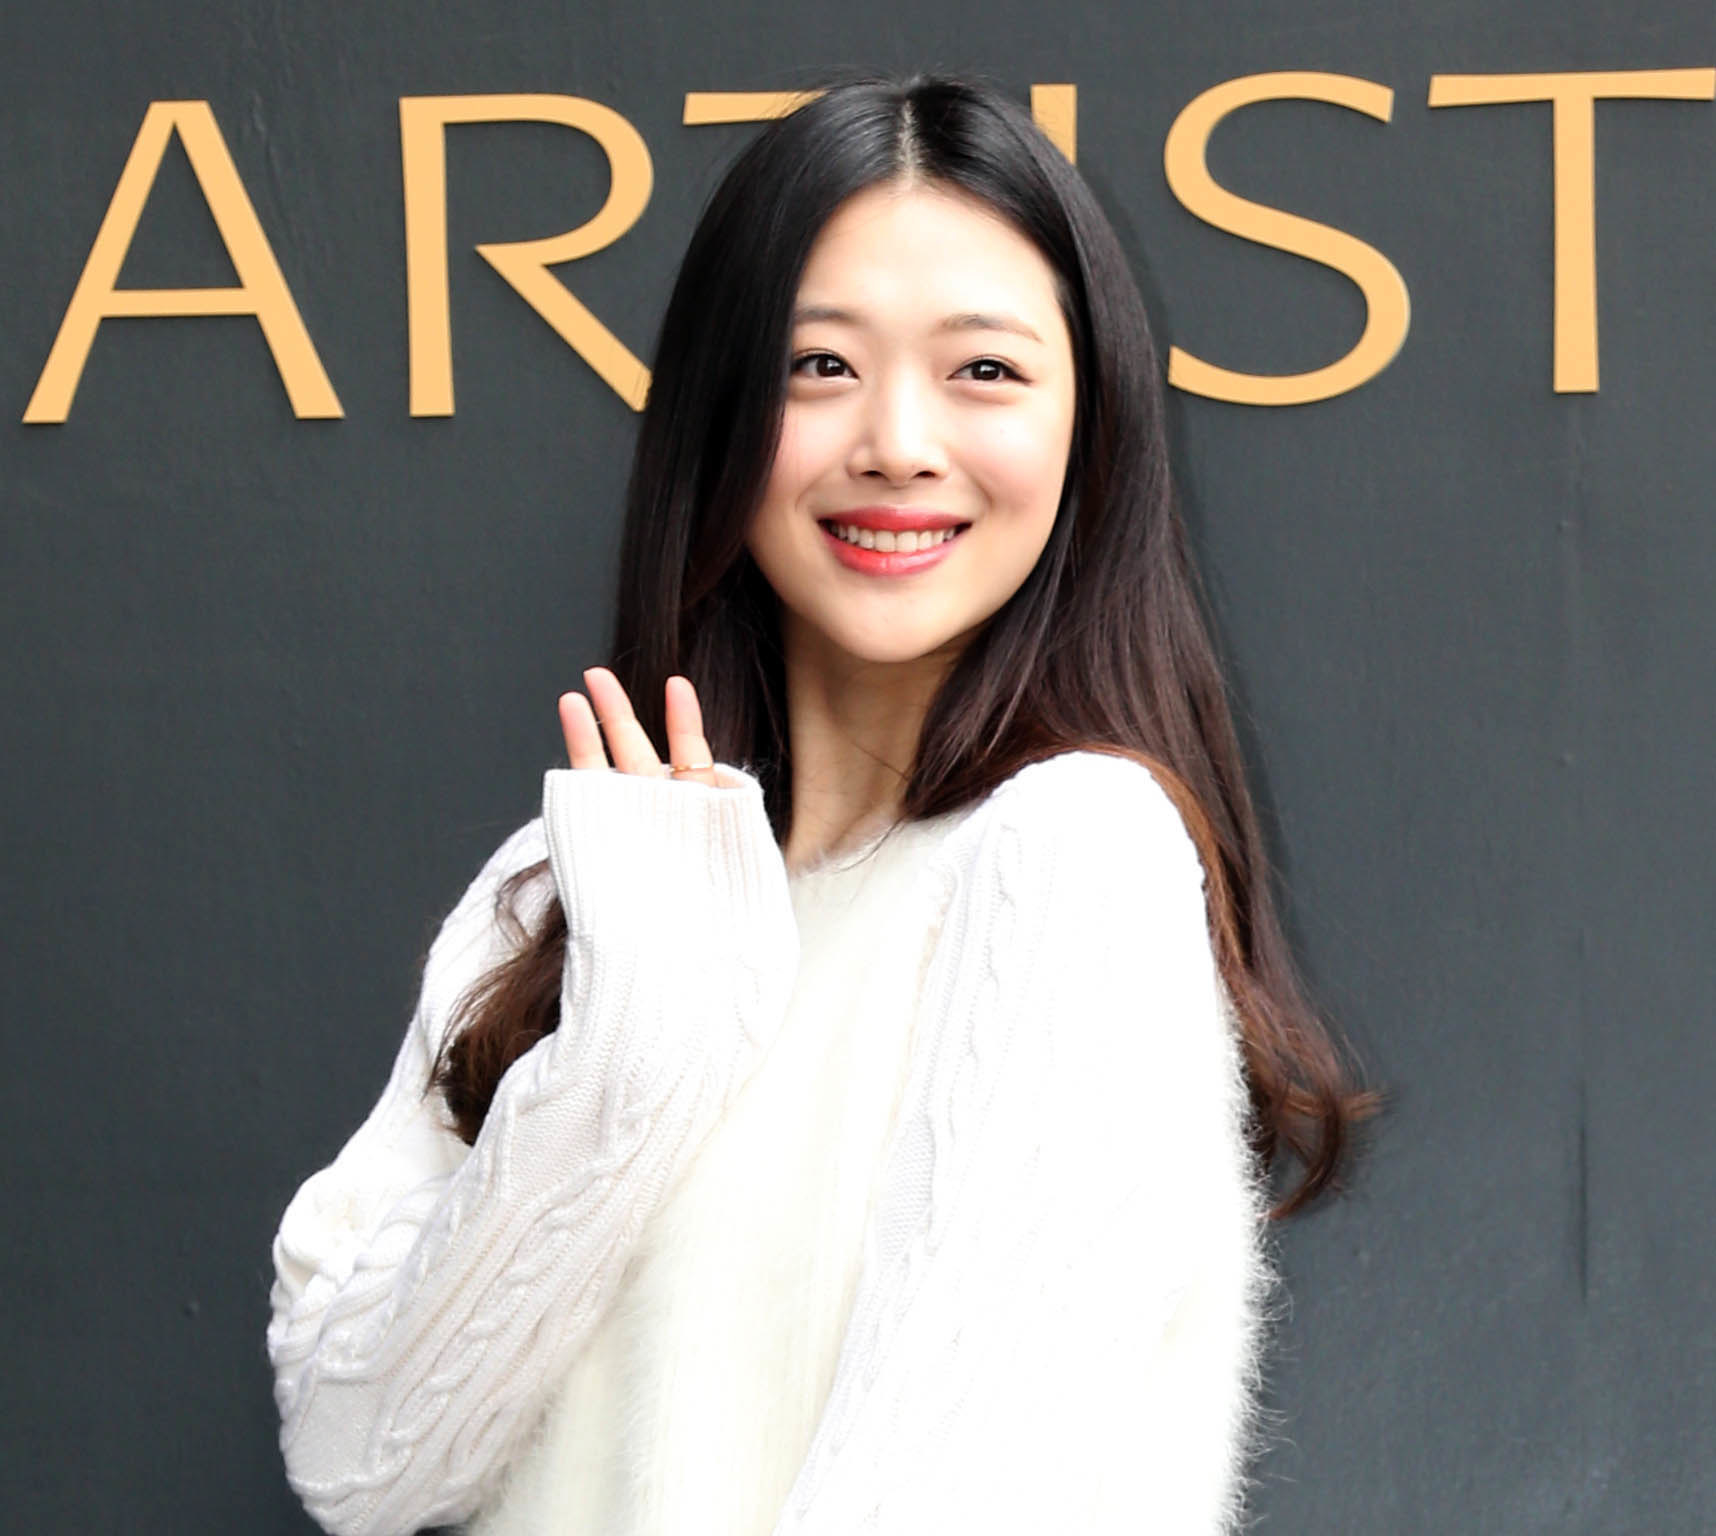 Jinri Choi waves at the camera with her right hand.